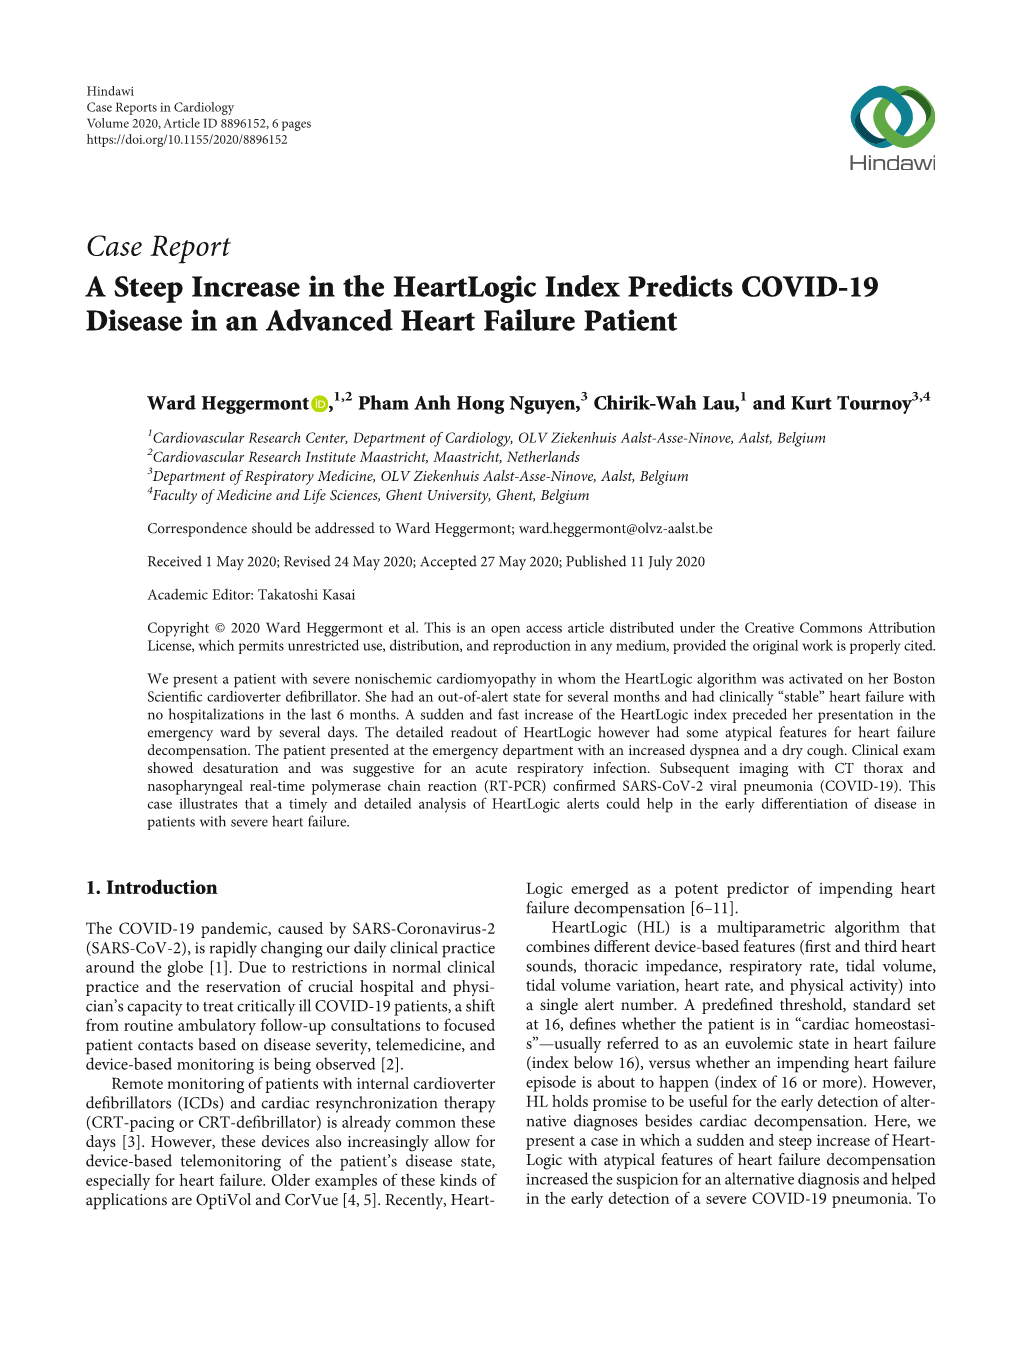 Case Report a Steep Increase in the Heartlogic Index Predicts COVID-19 Disease in an Advanced Heart Failure Patient